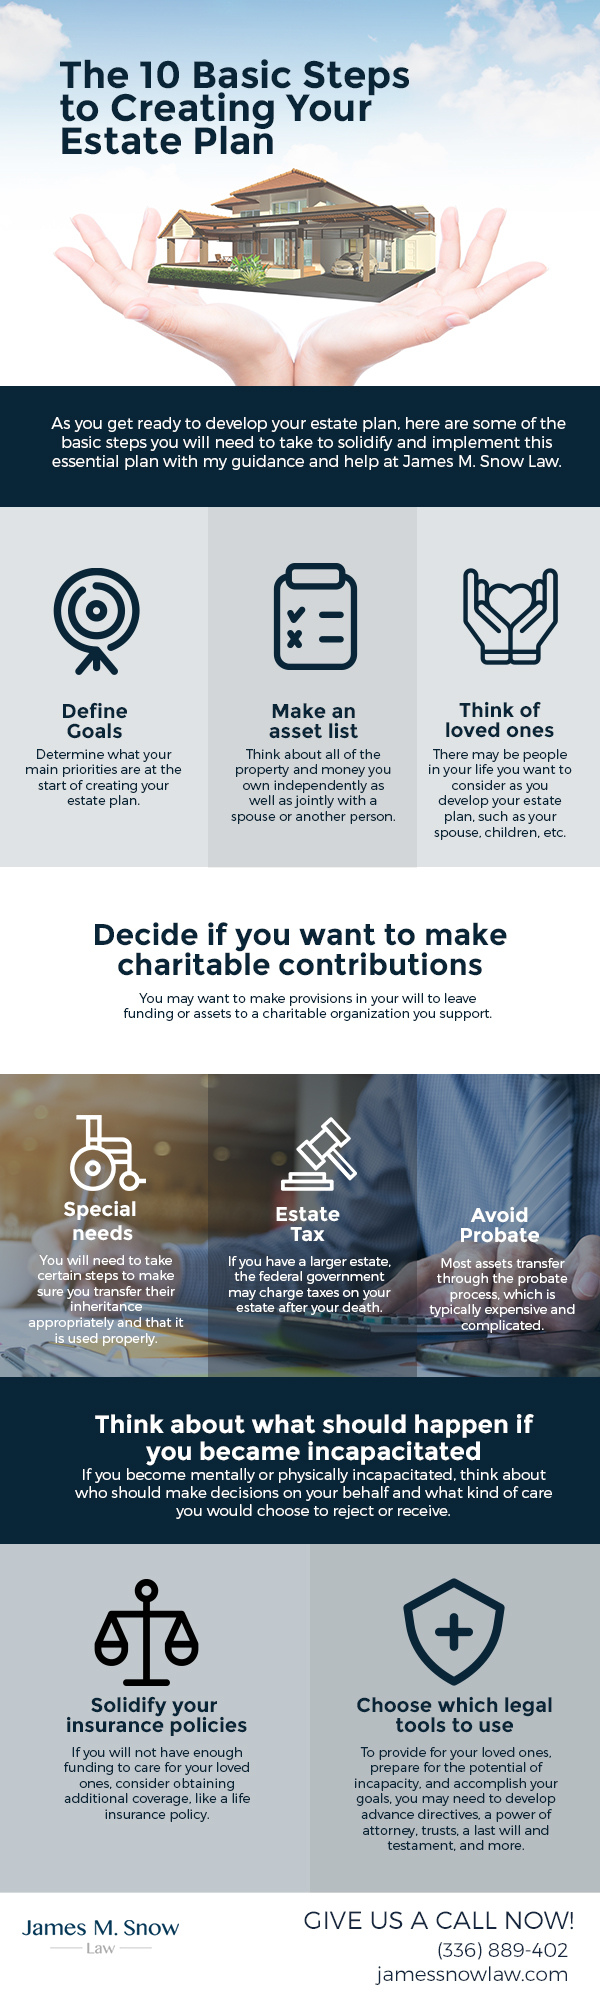 The 10 Basic Steps to Creating Your Estate Plan [infographic]